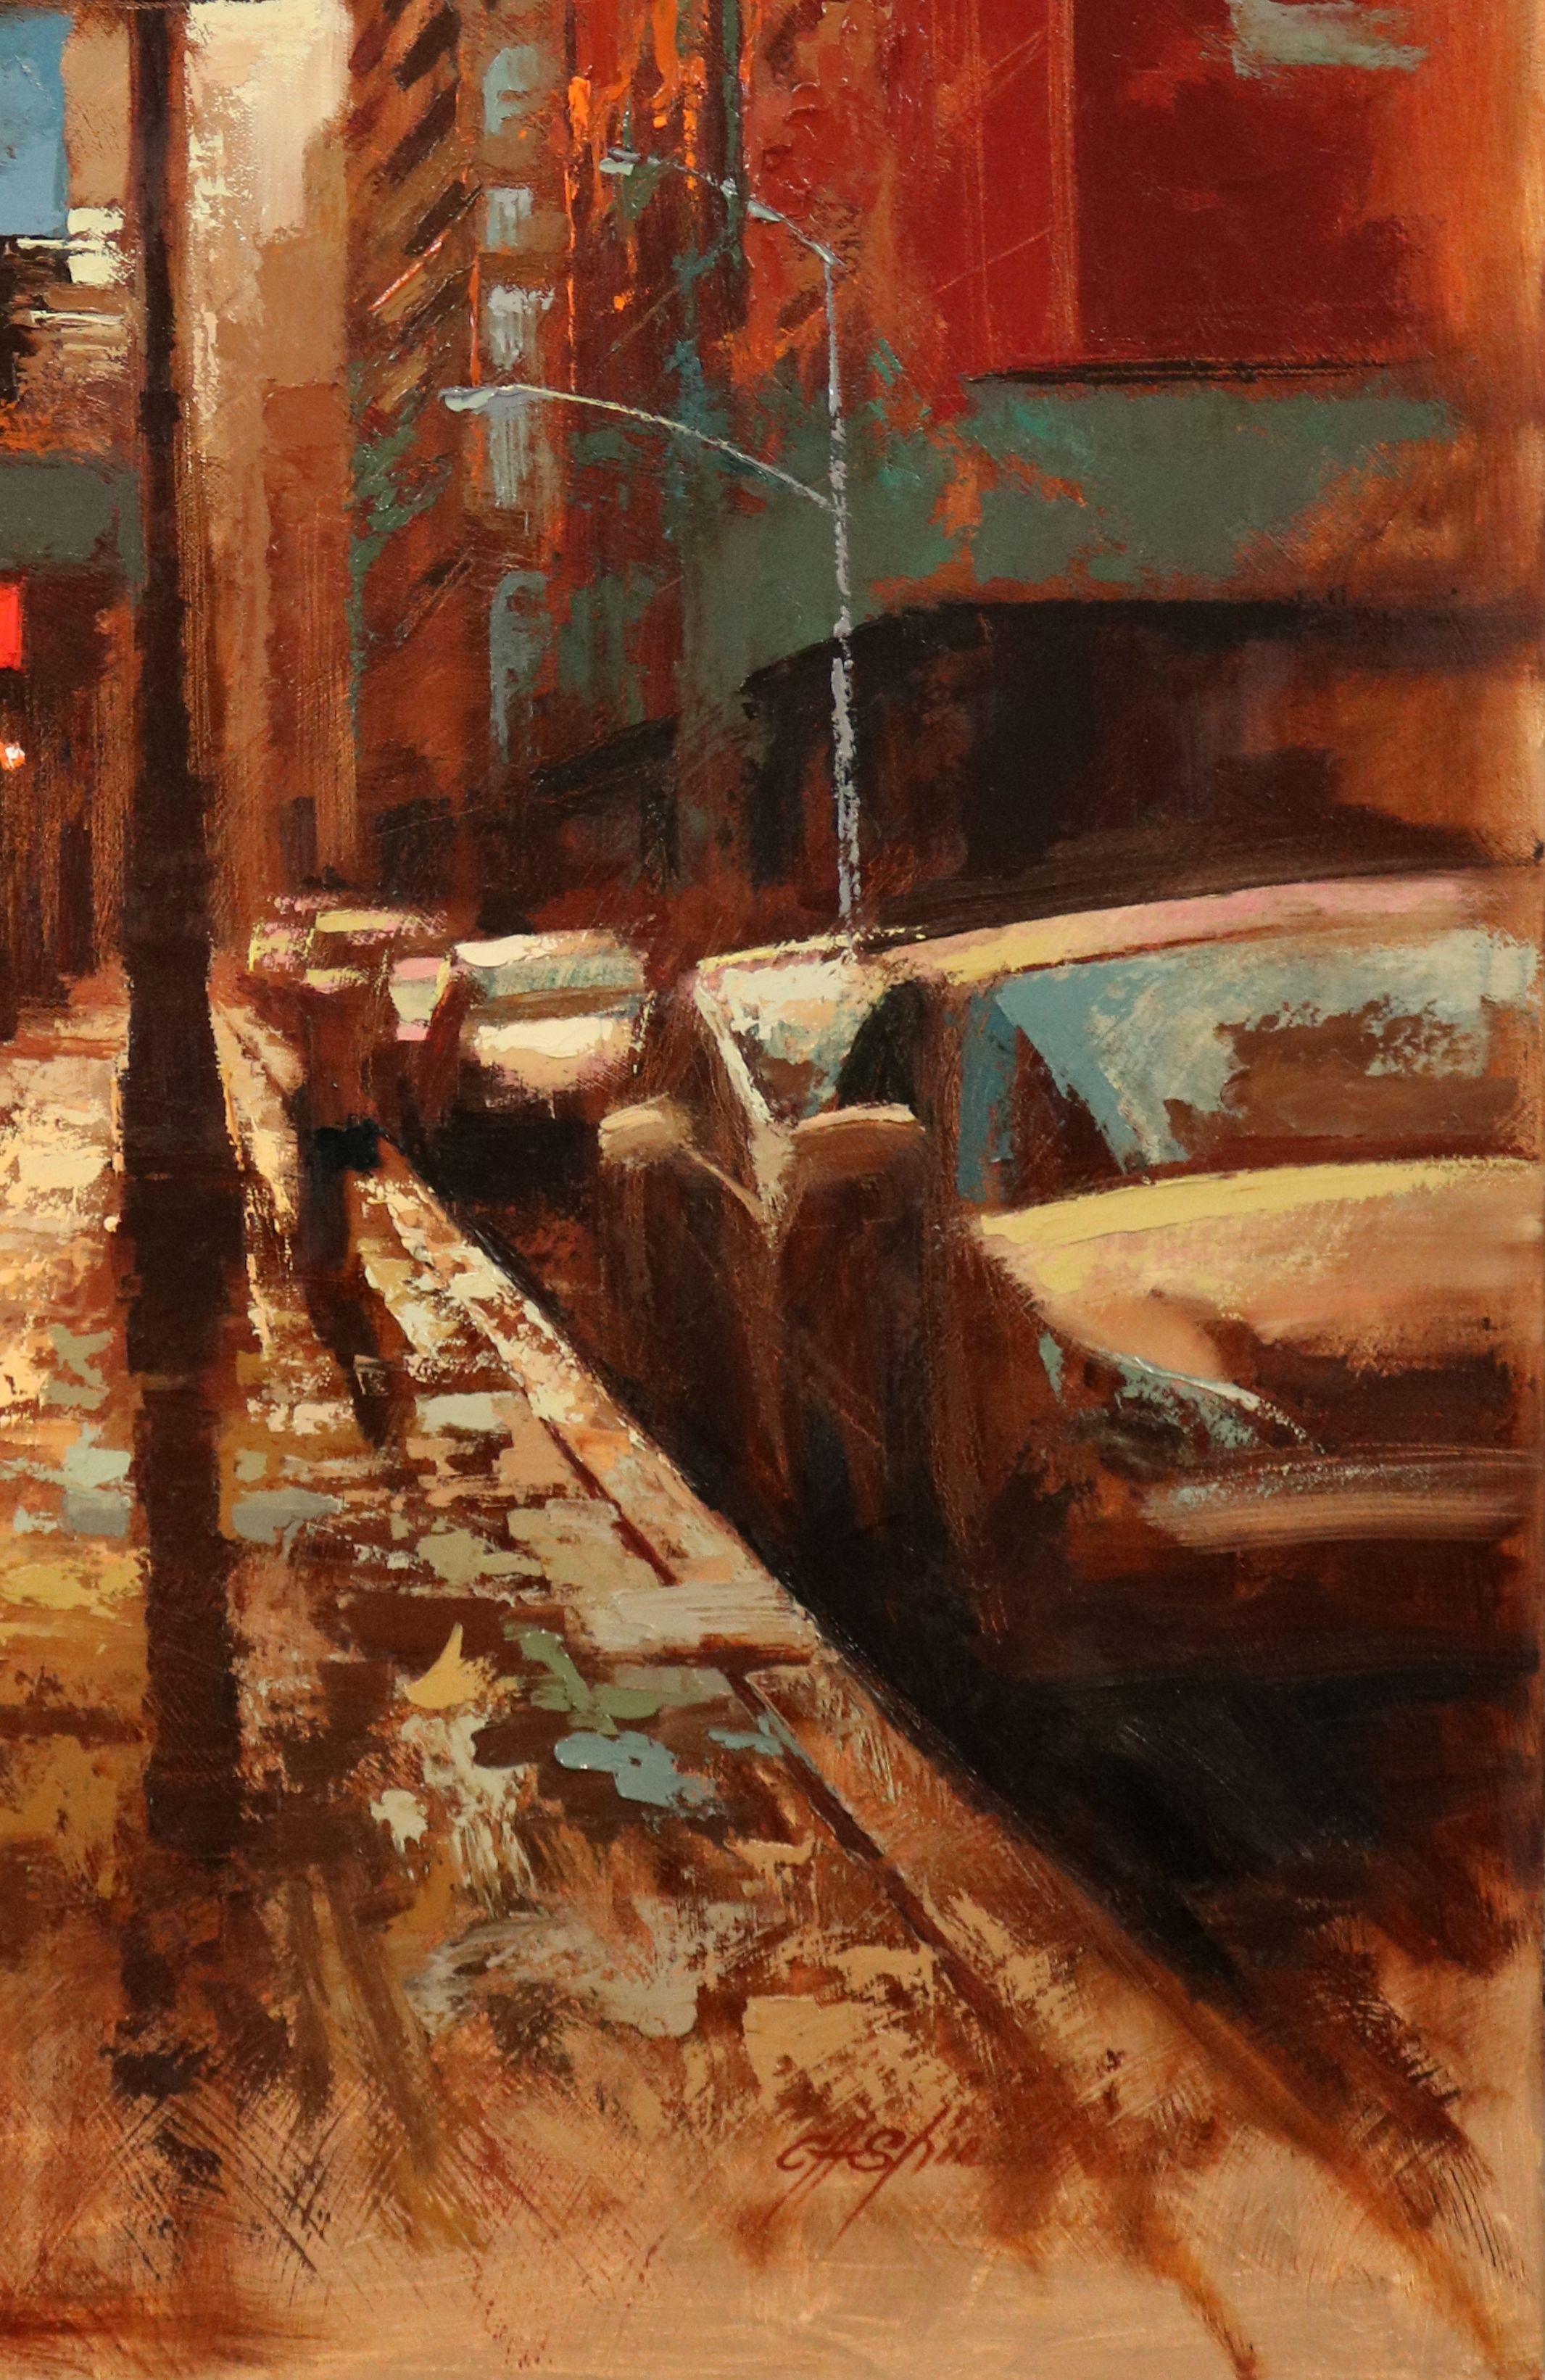 Oil on Canvas    40 x 30 x 1.5 inches    from Prince Street, Soho    * inspired by spirit of New York city    * I walk around Prince Street, New York sometimes but   the mood of this village is different every time. the mood of   late afternoon